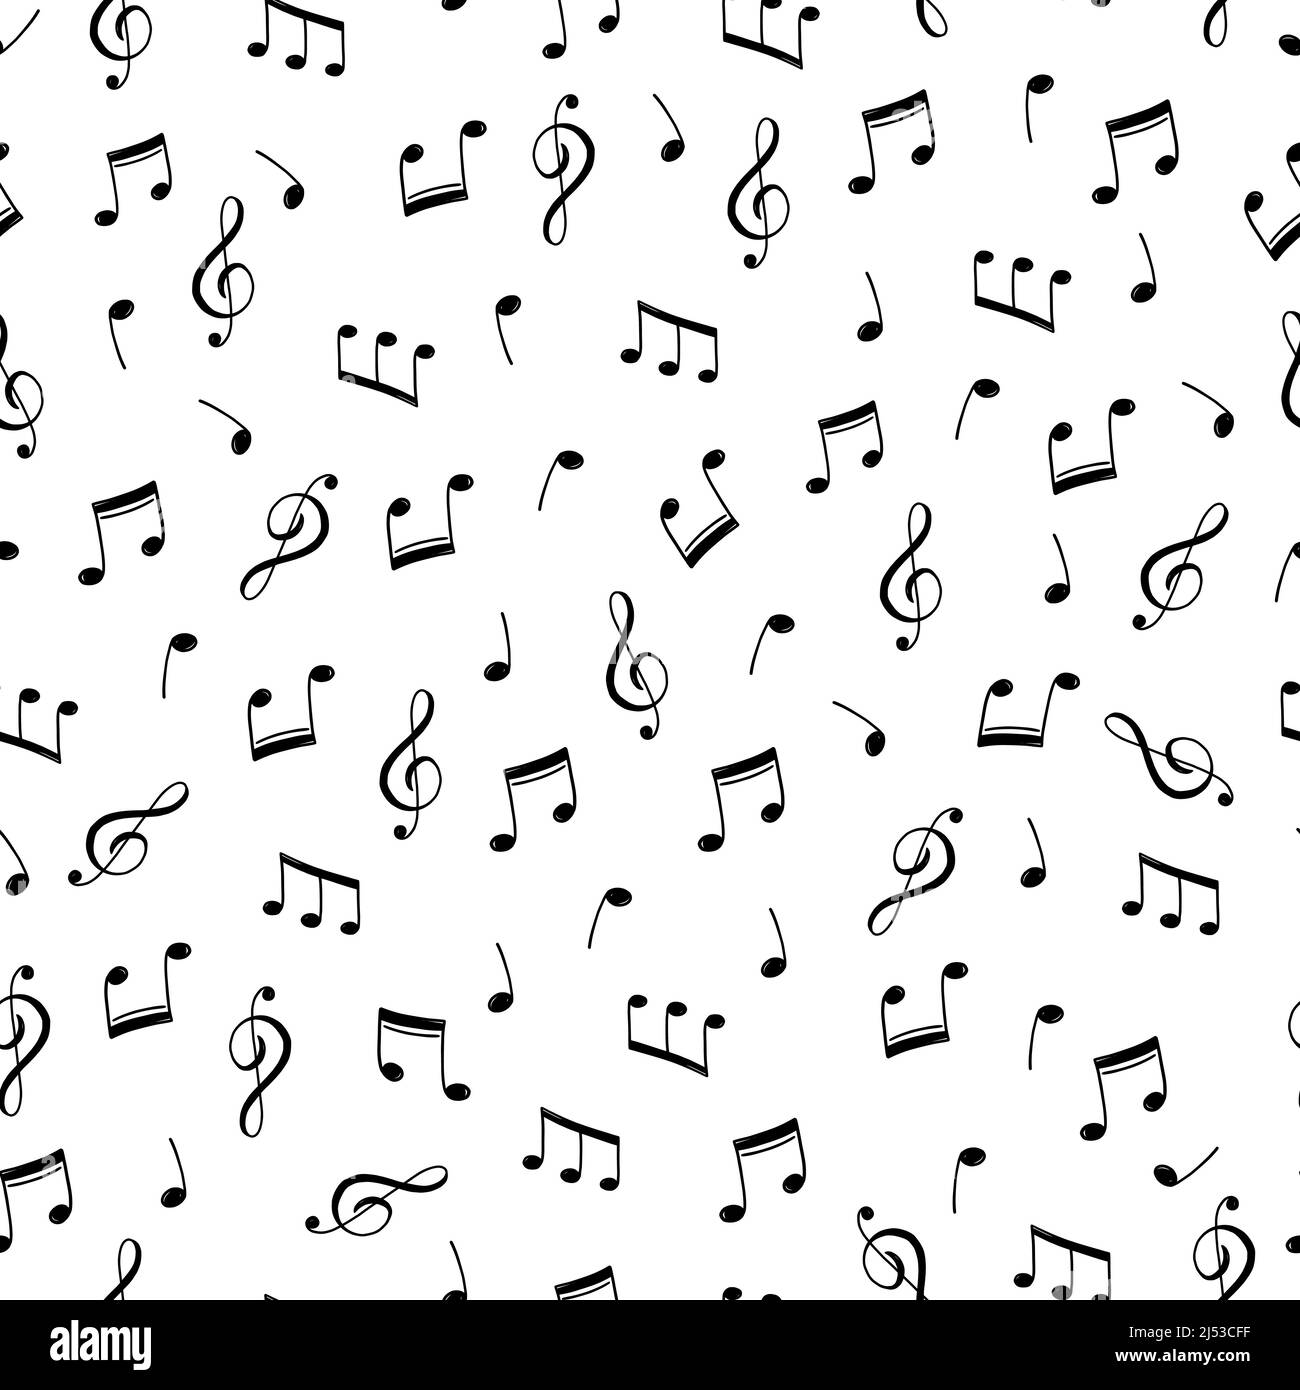 Music note doodle drawn pattern. Hand drawn sketch musical note ...